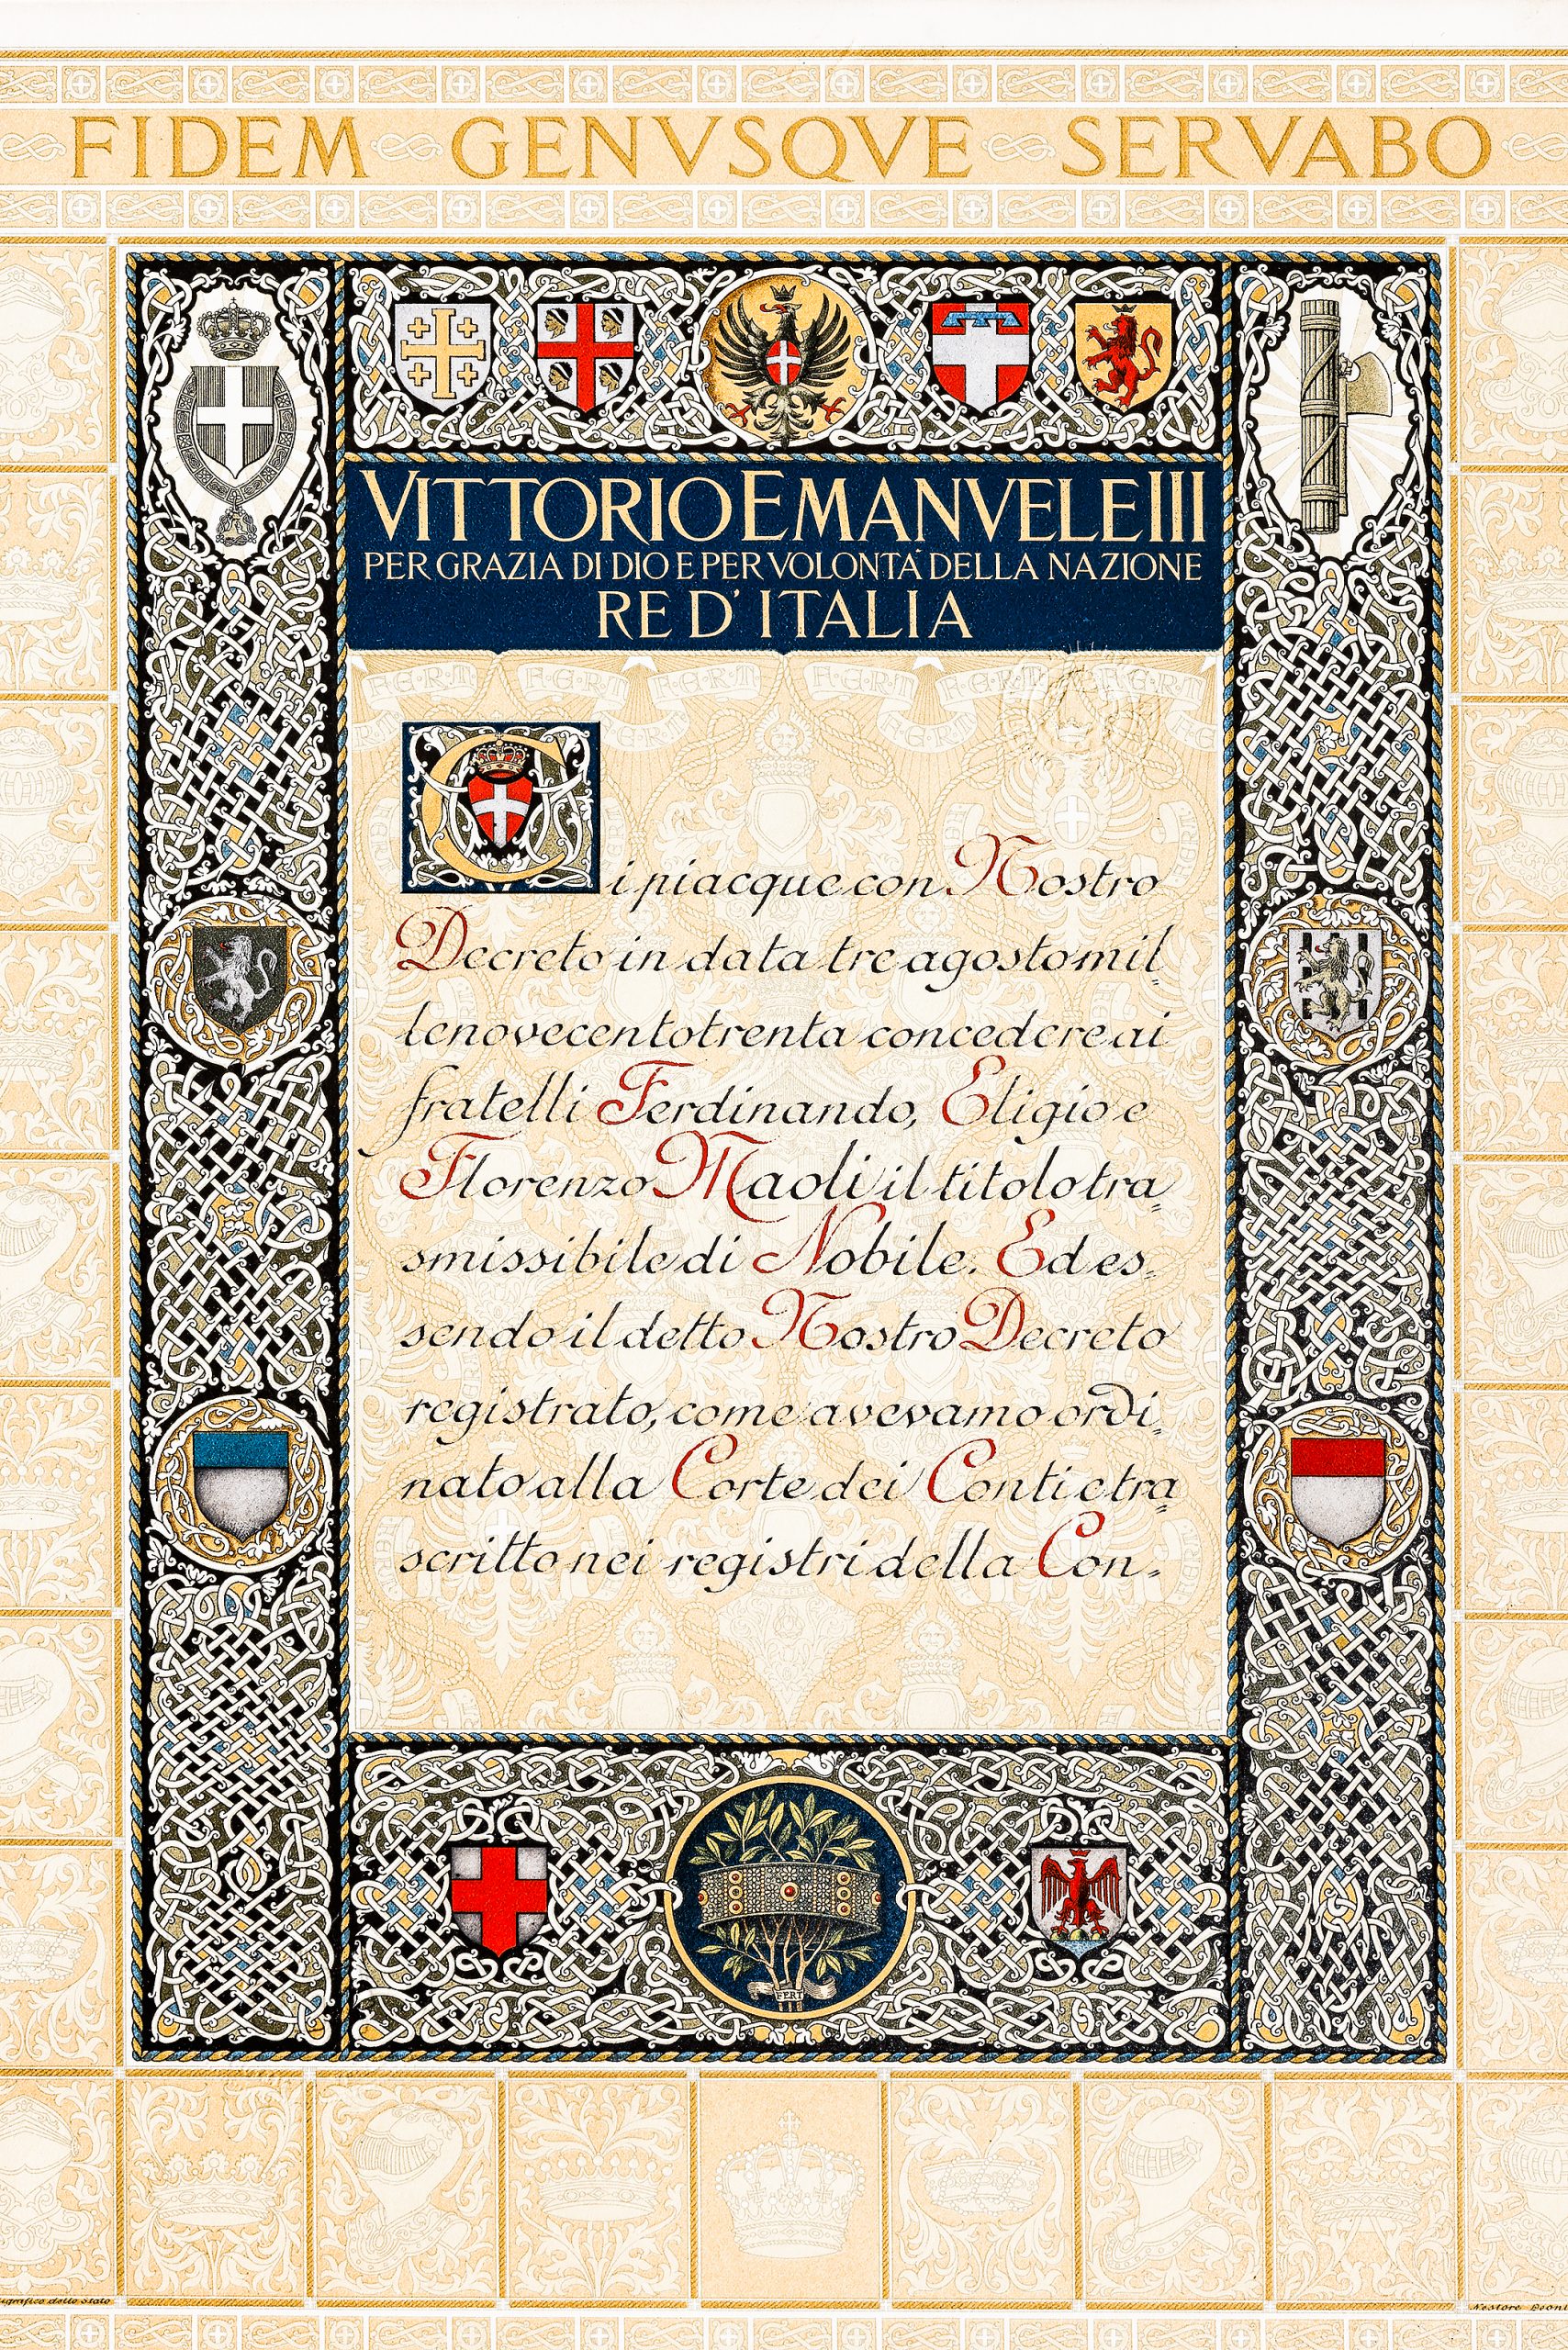 After the Italian unification in the mid-19th century, the Maolis lost their title of marquis that they had enjoyed for centuries under Spanish rule. However, Vittorio Emanuele, III, King of Italy, recognized their nobility by heraldic decree in 1930. The registered document decrees “consecrated brothers Ferdinando, Eligio, and Florenzo Maoli the transmissible title of Noble.” 